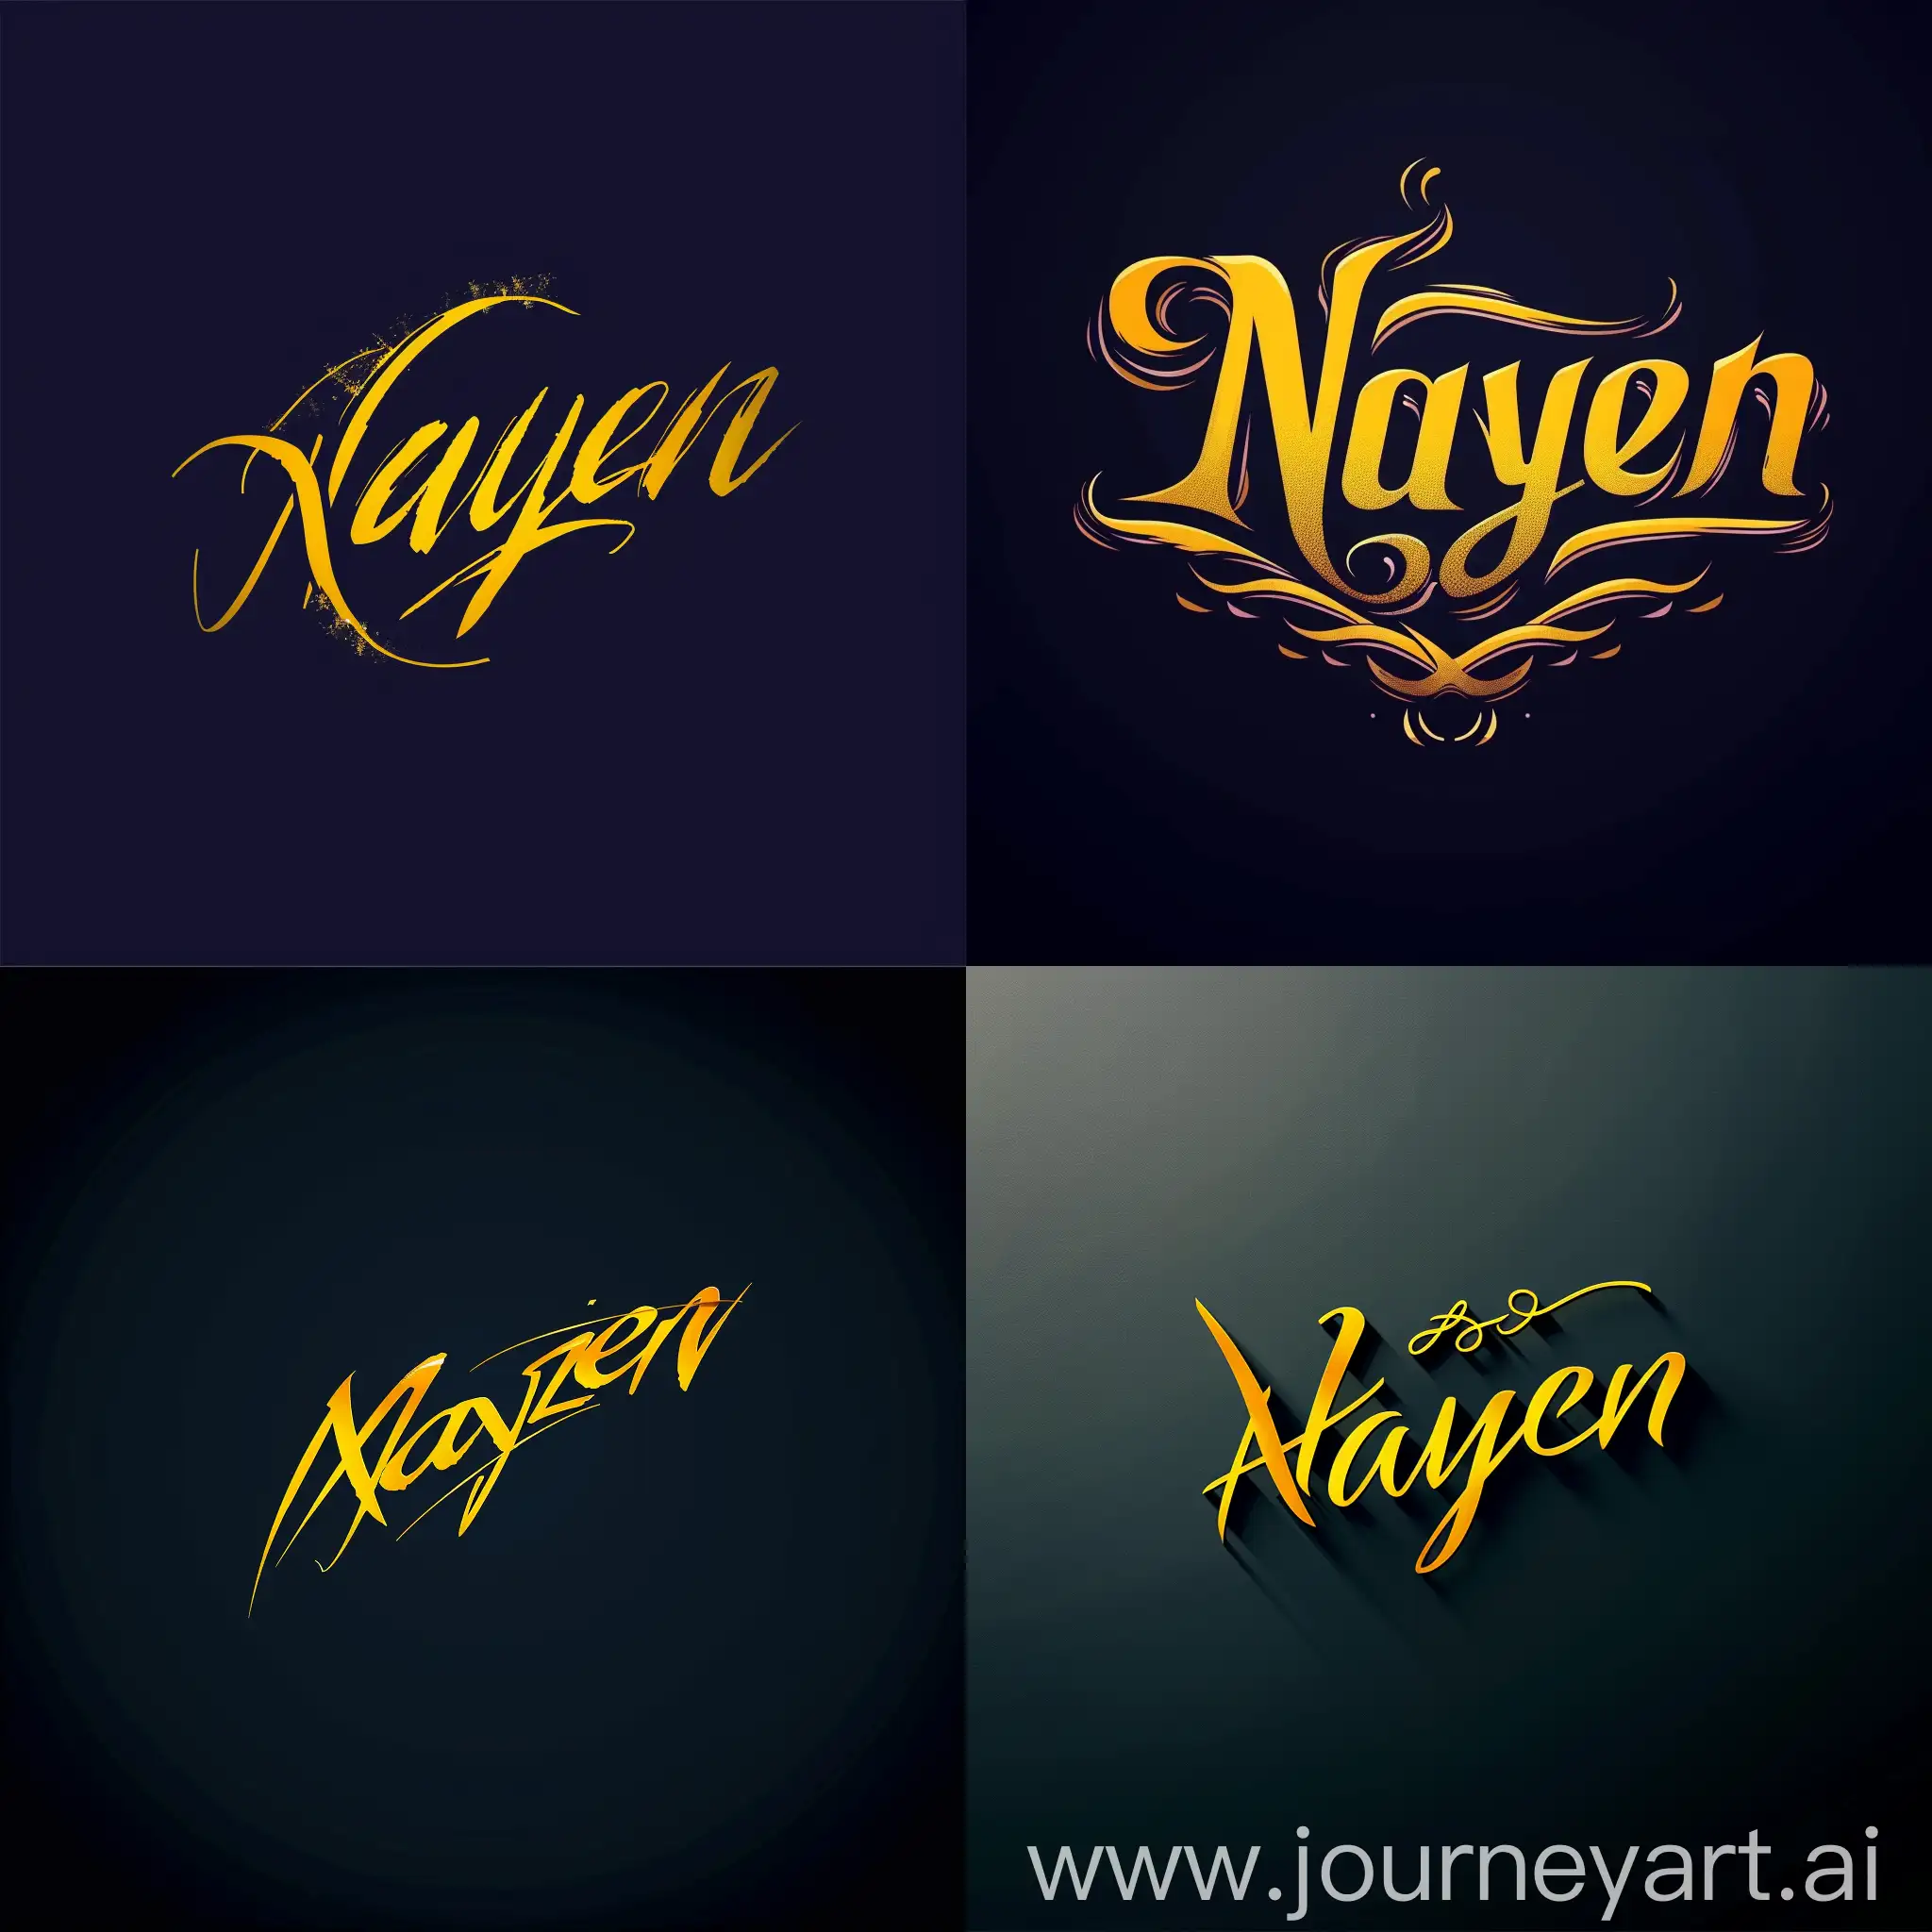 Logo for the Name Nayden, Yellow writing, dark background